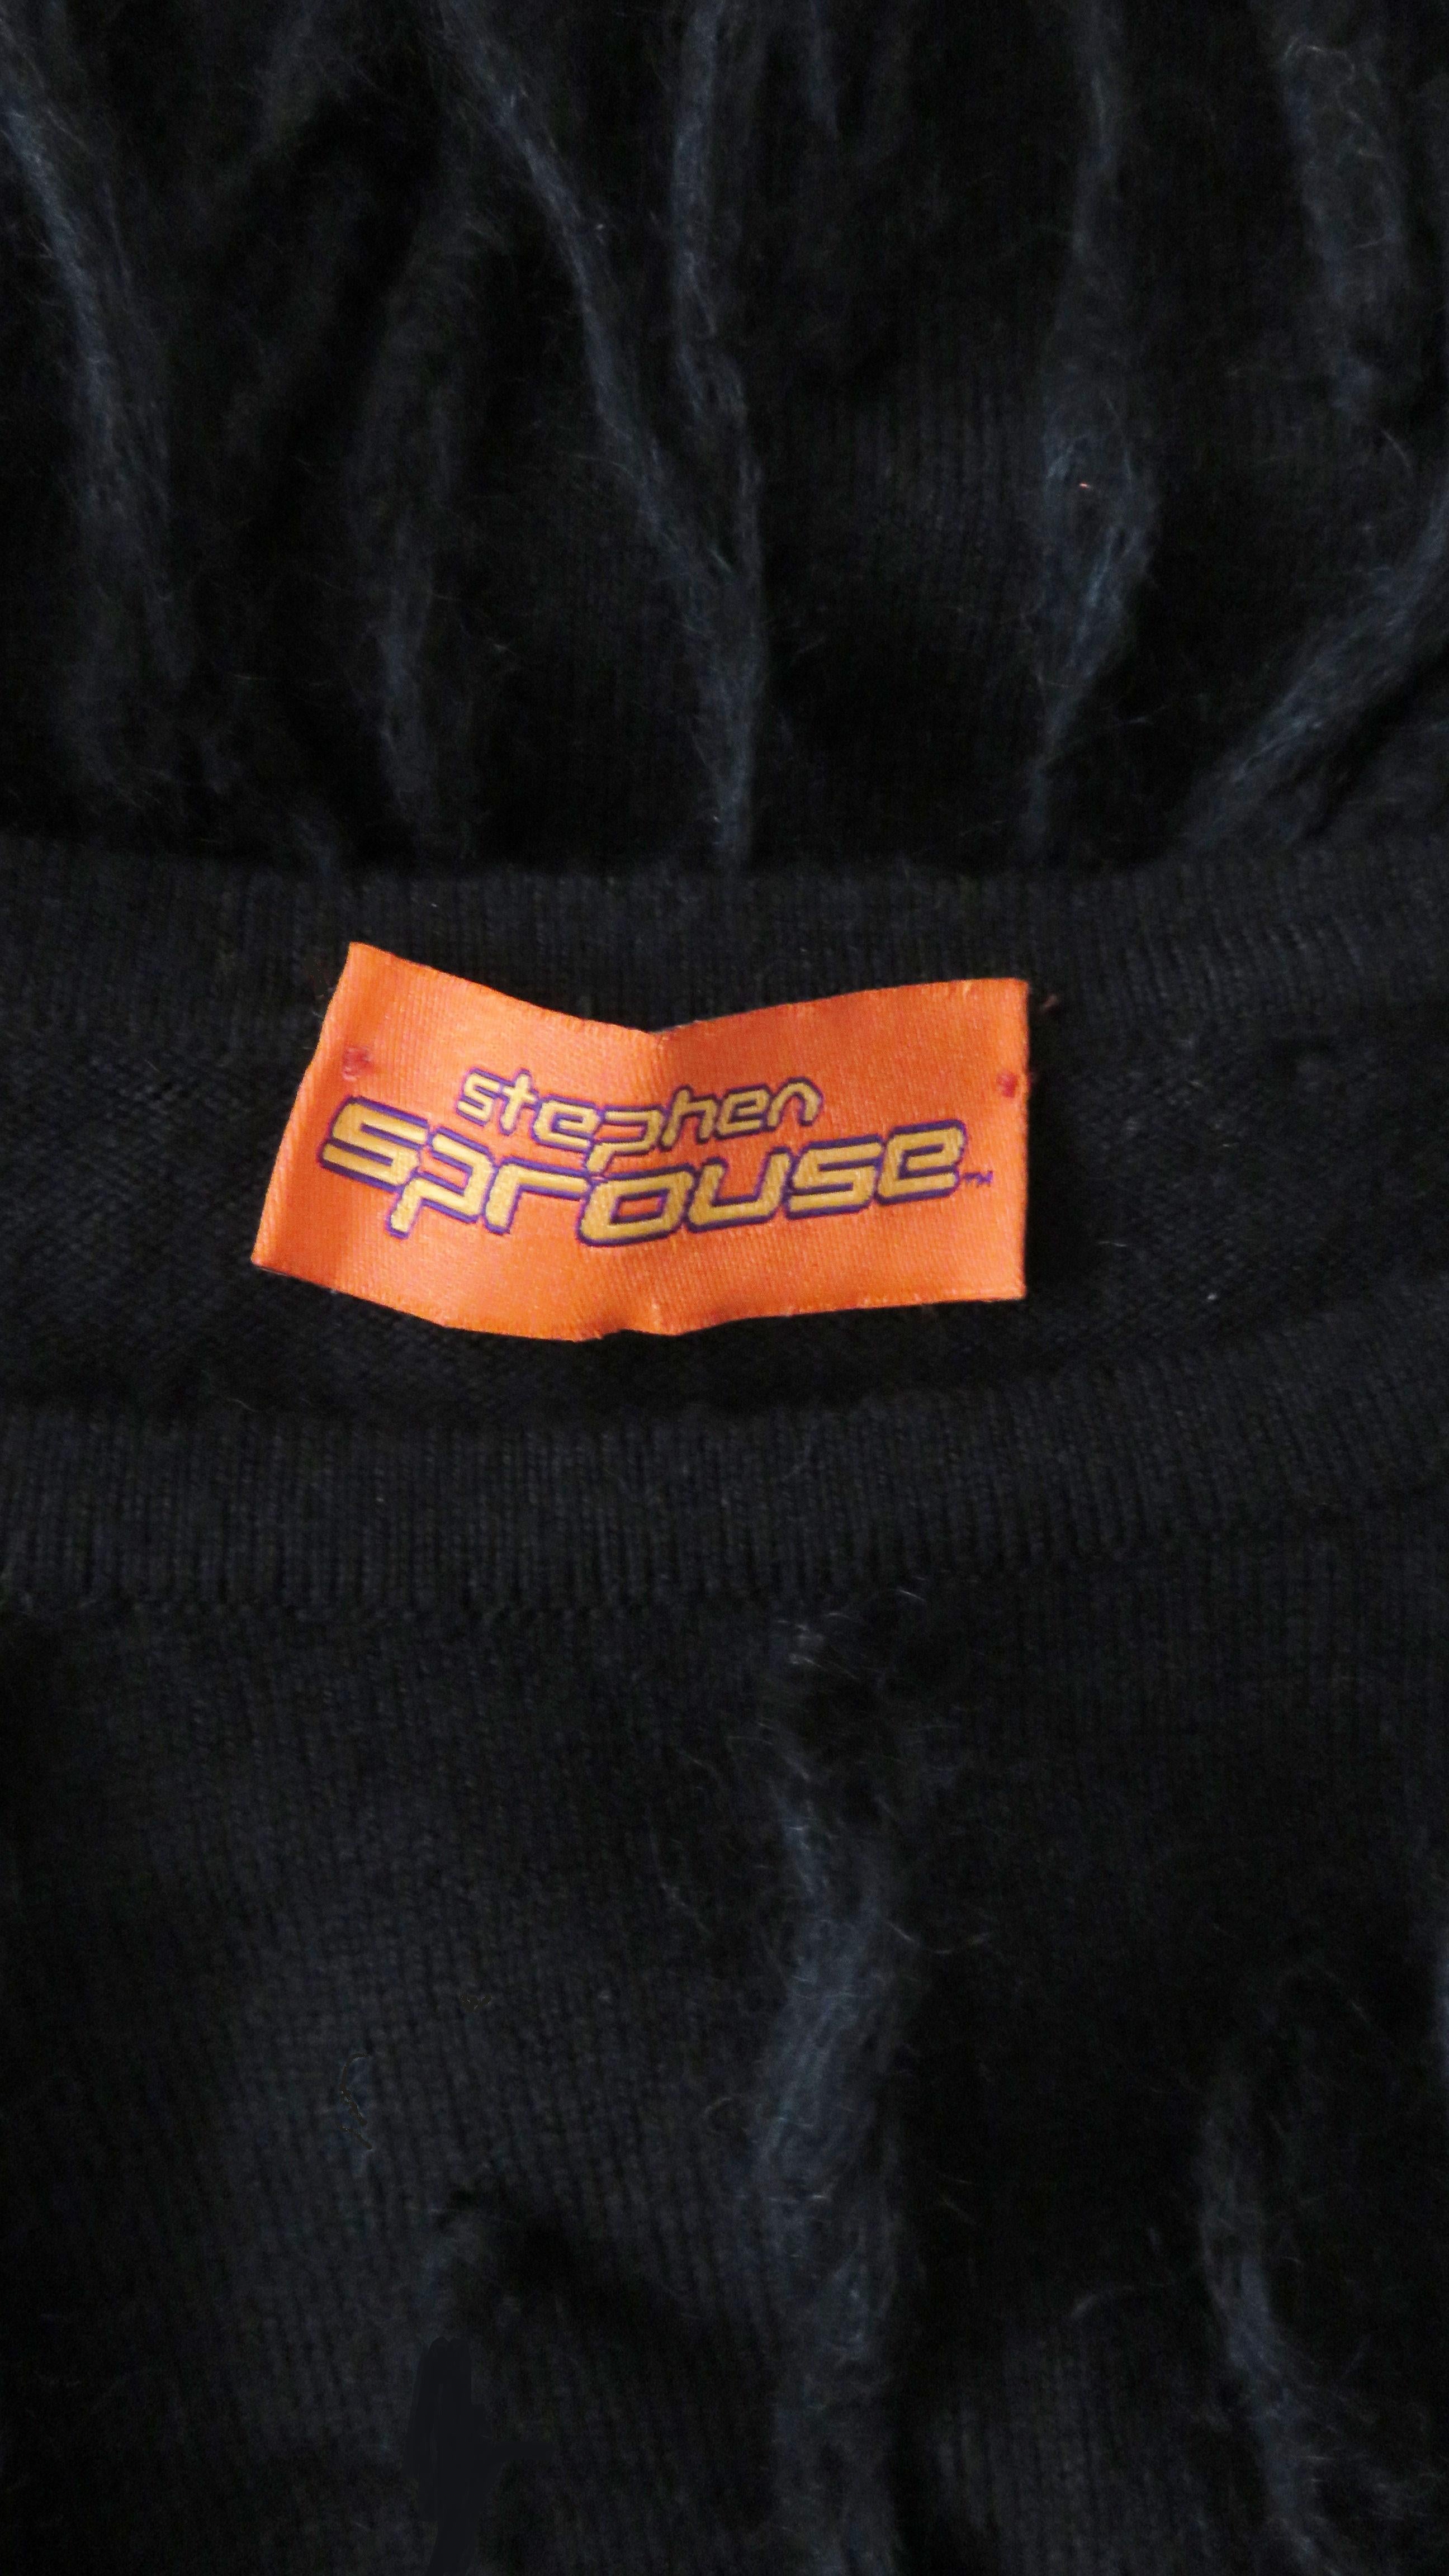 Stephen Sprouse New Applique Sweater 1990s For Sale 8